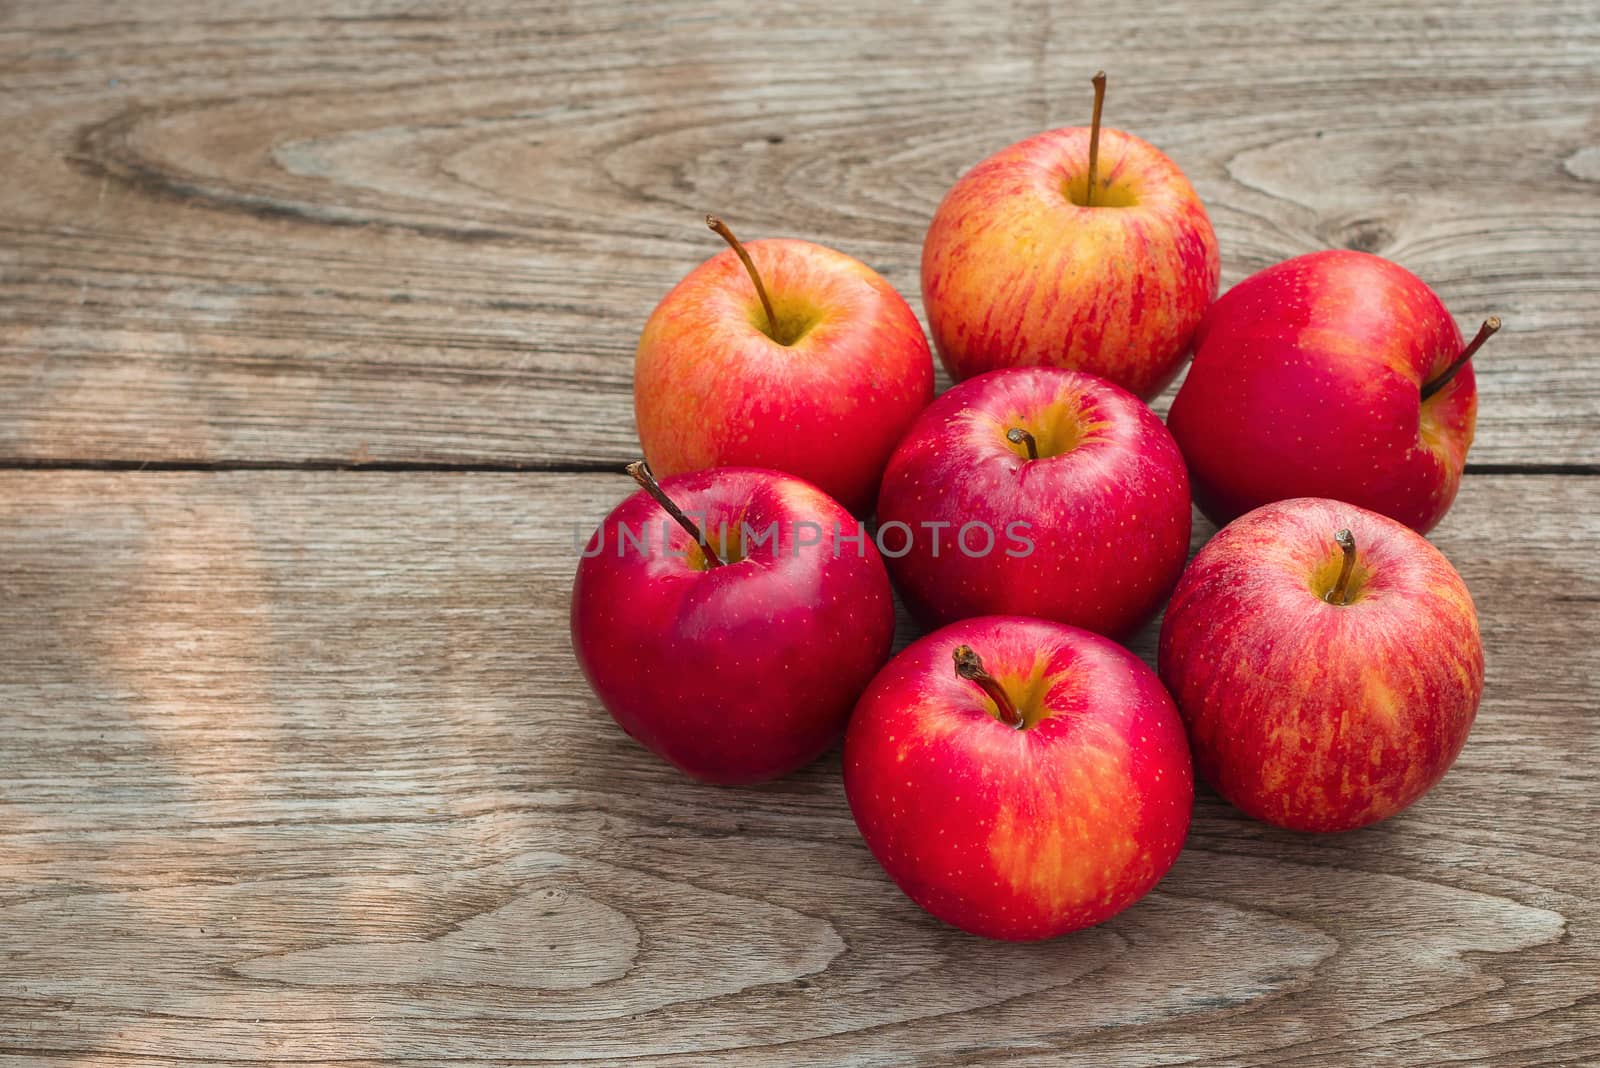 Red apples on a wooden table background by kaiskynet